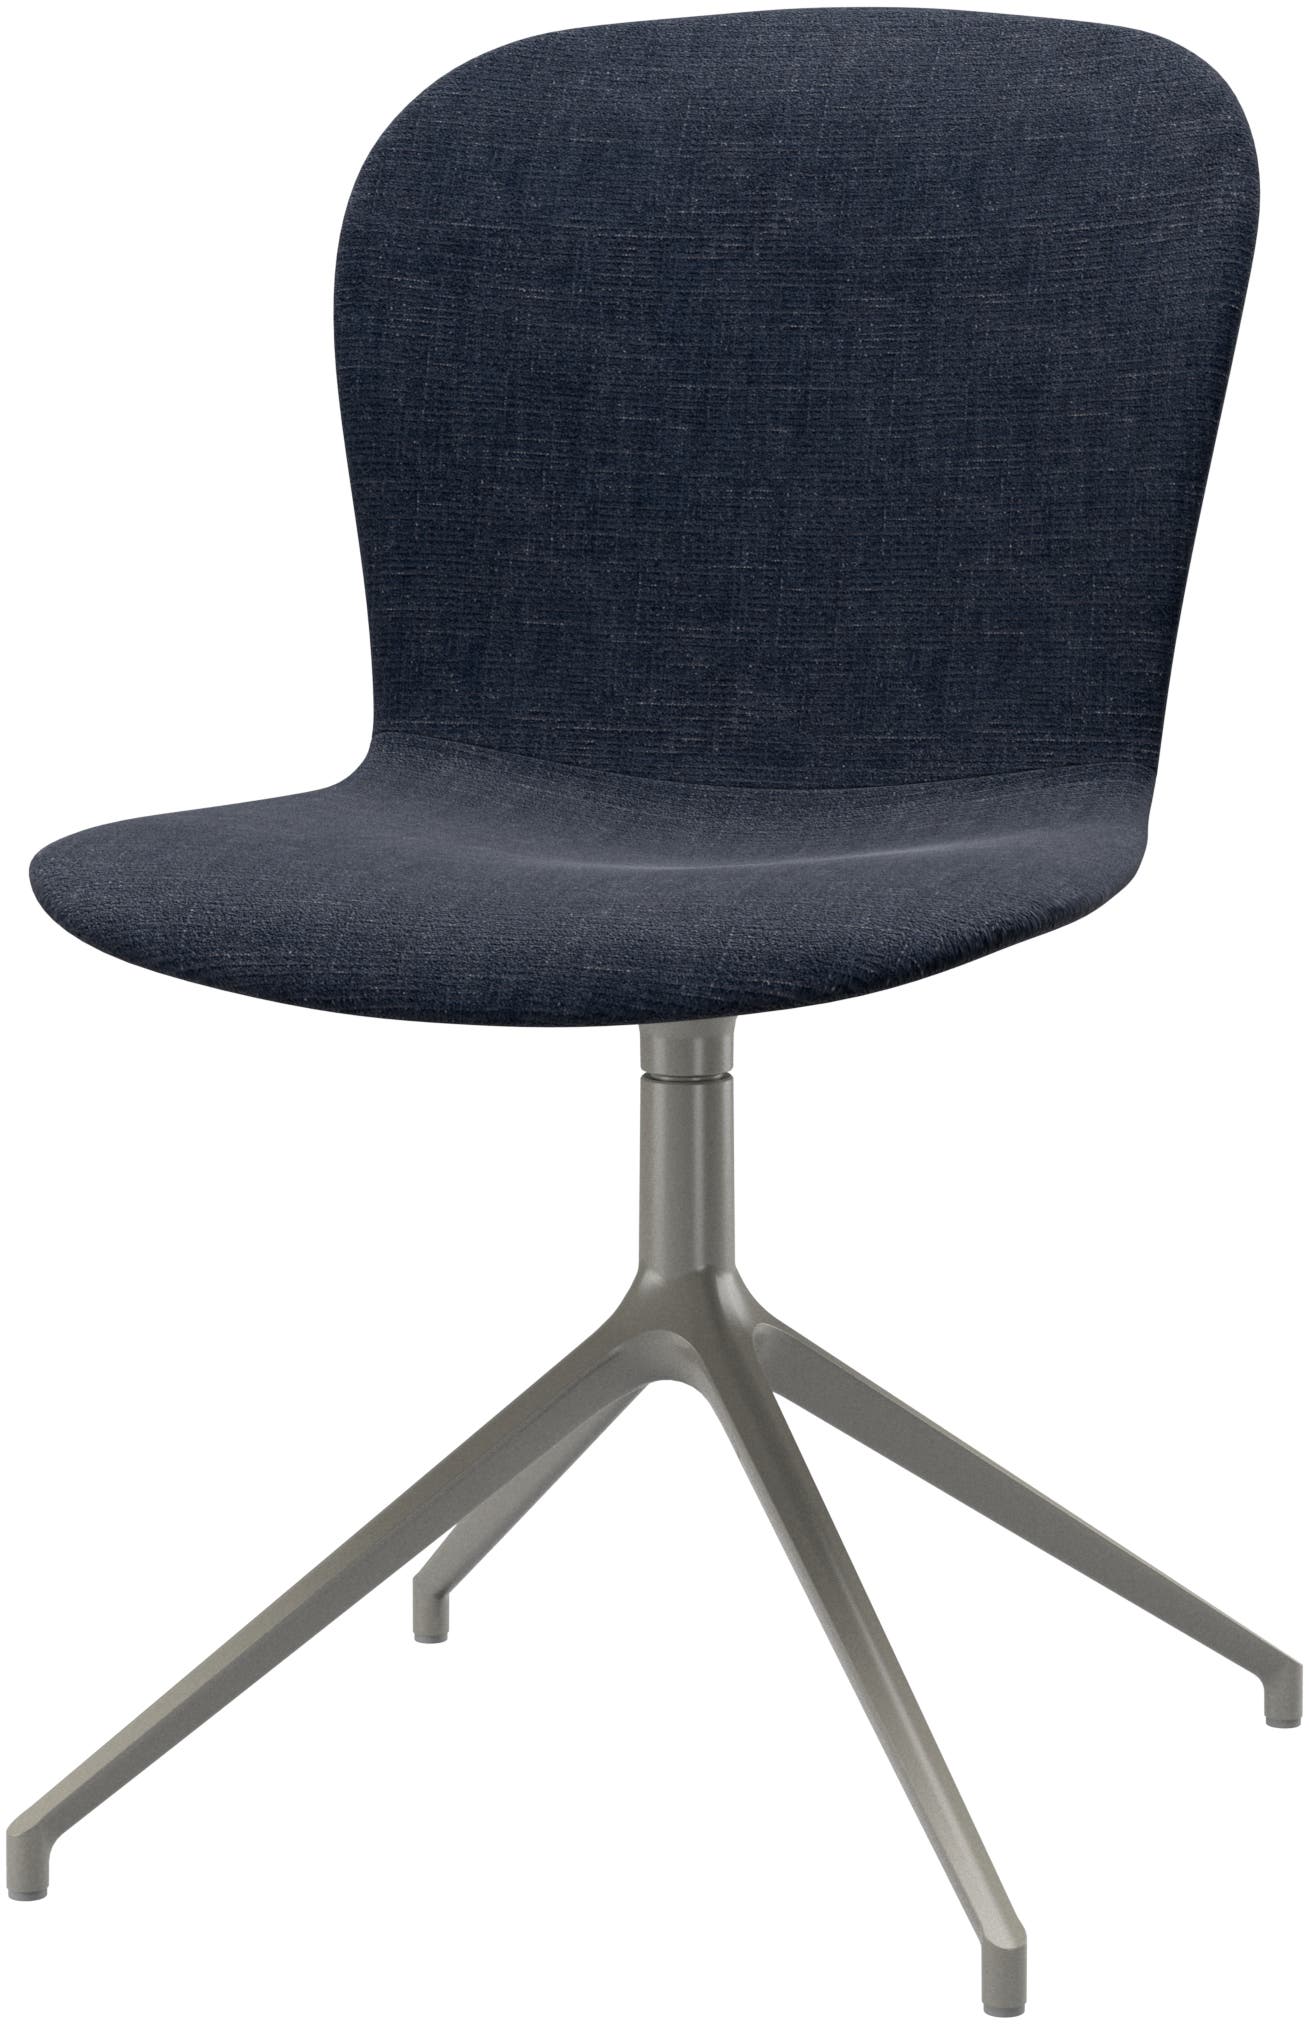 Adelaide chair with swivel function